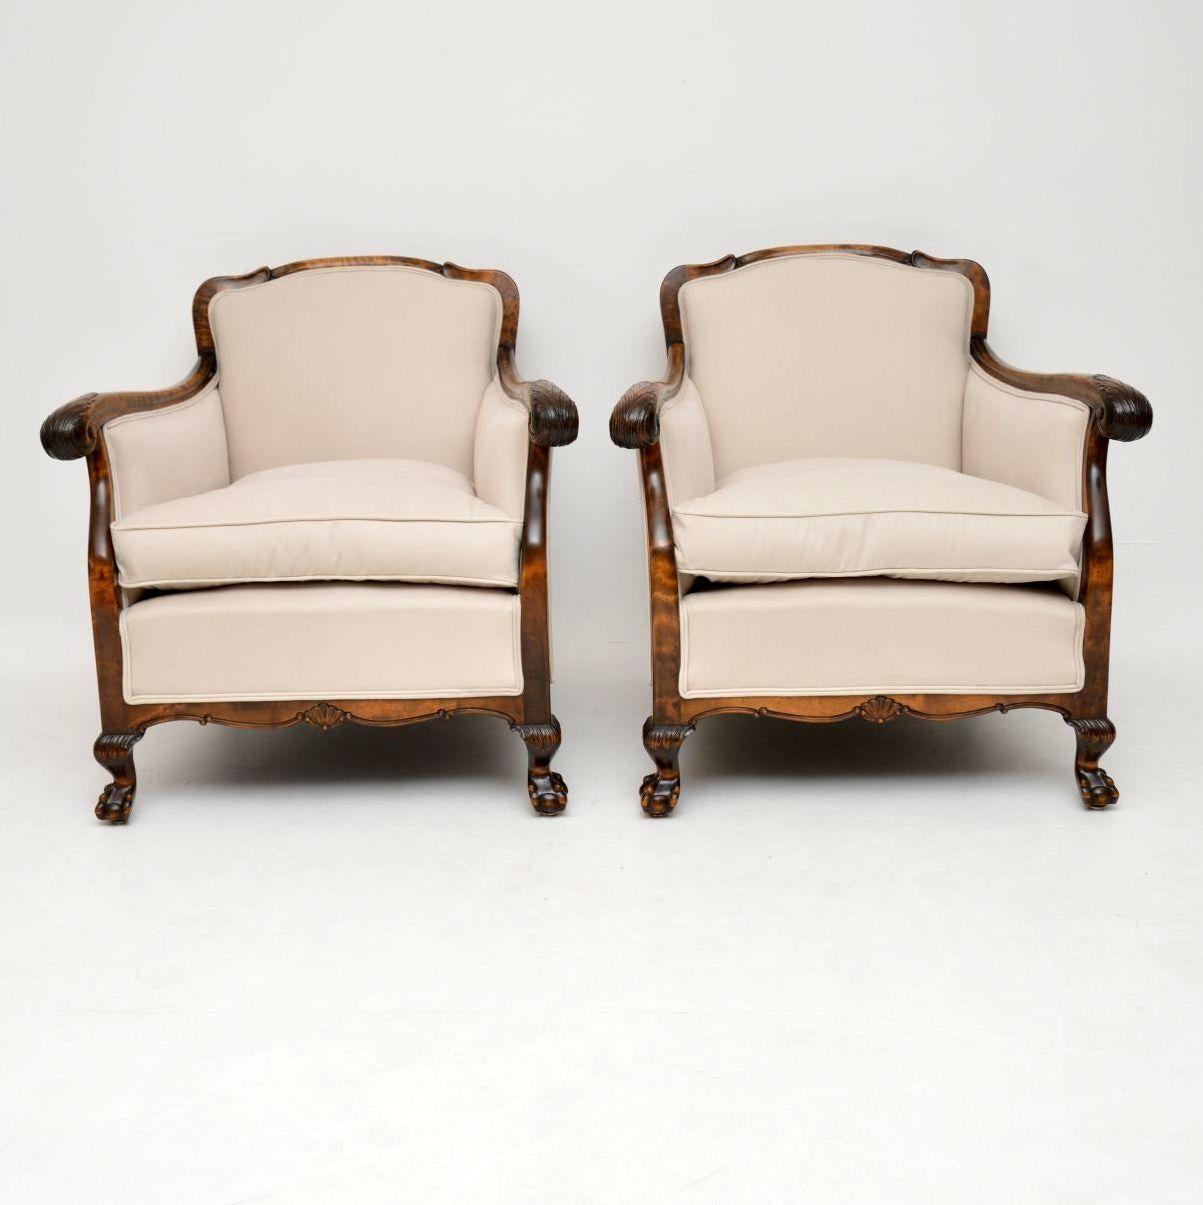 This pair of antique Swedish satin birch armchairs are really comfortable & have a lovely shape. They are solid satin birch throughout & have just been fully upholstered in a neutral colored fabric, with double piping on the edges & brand new